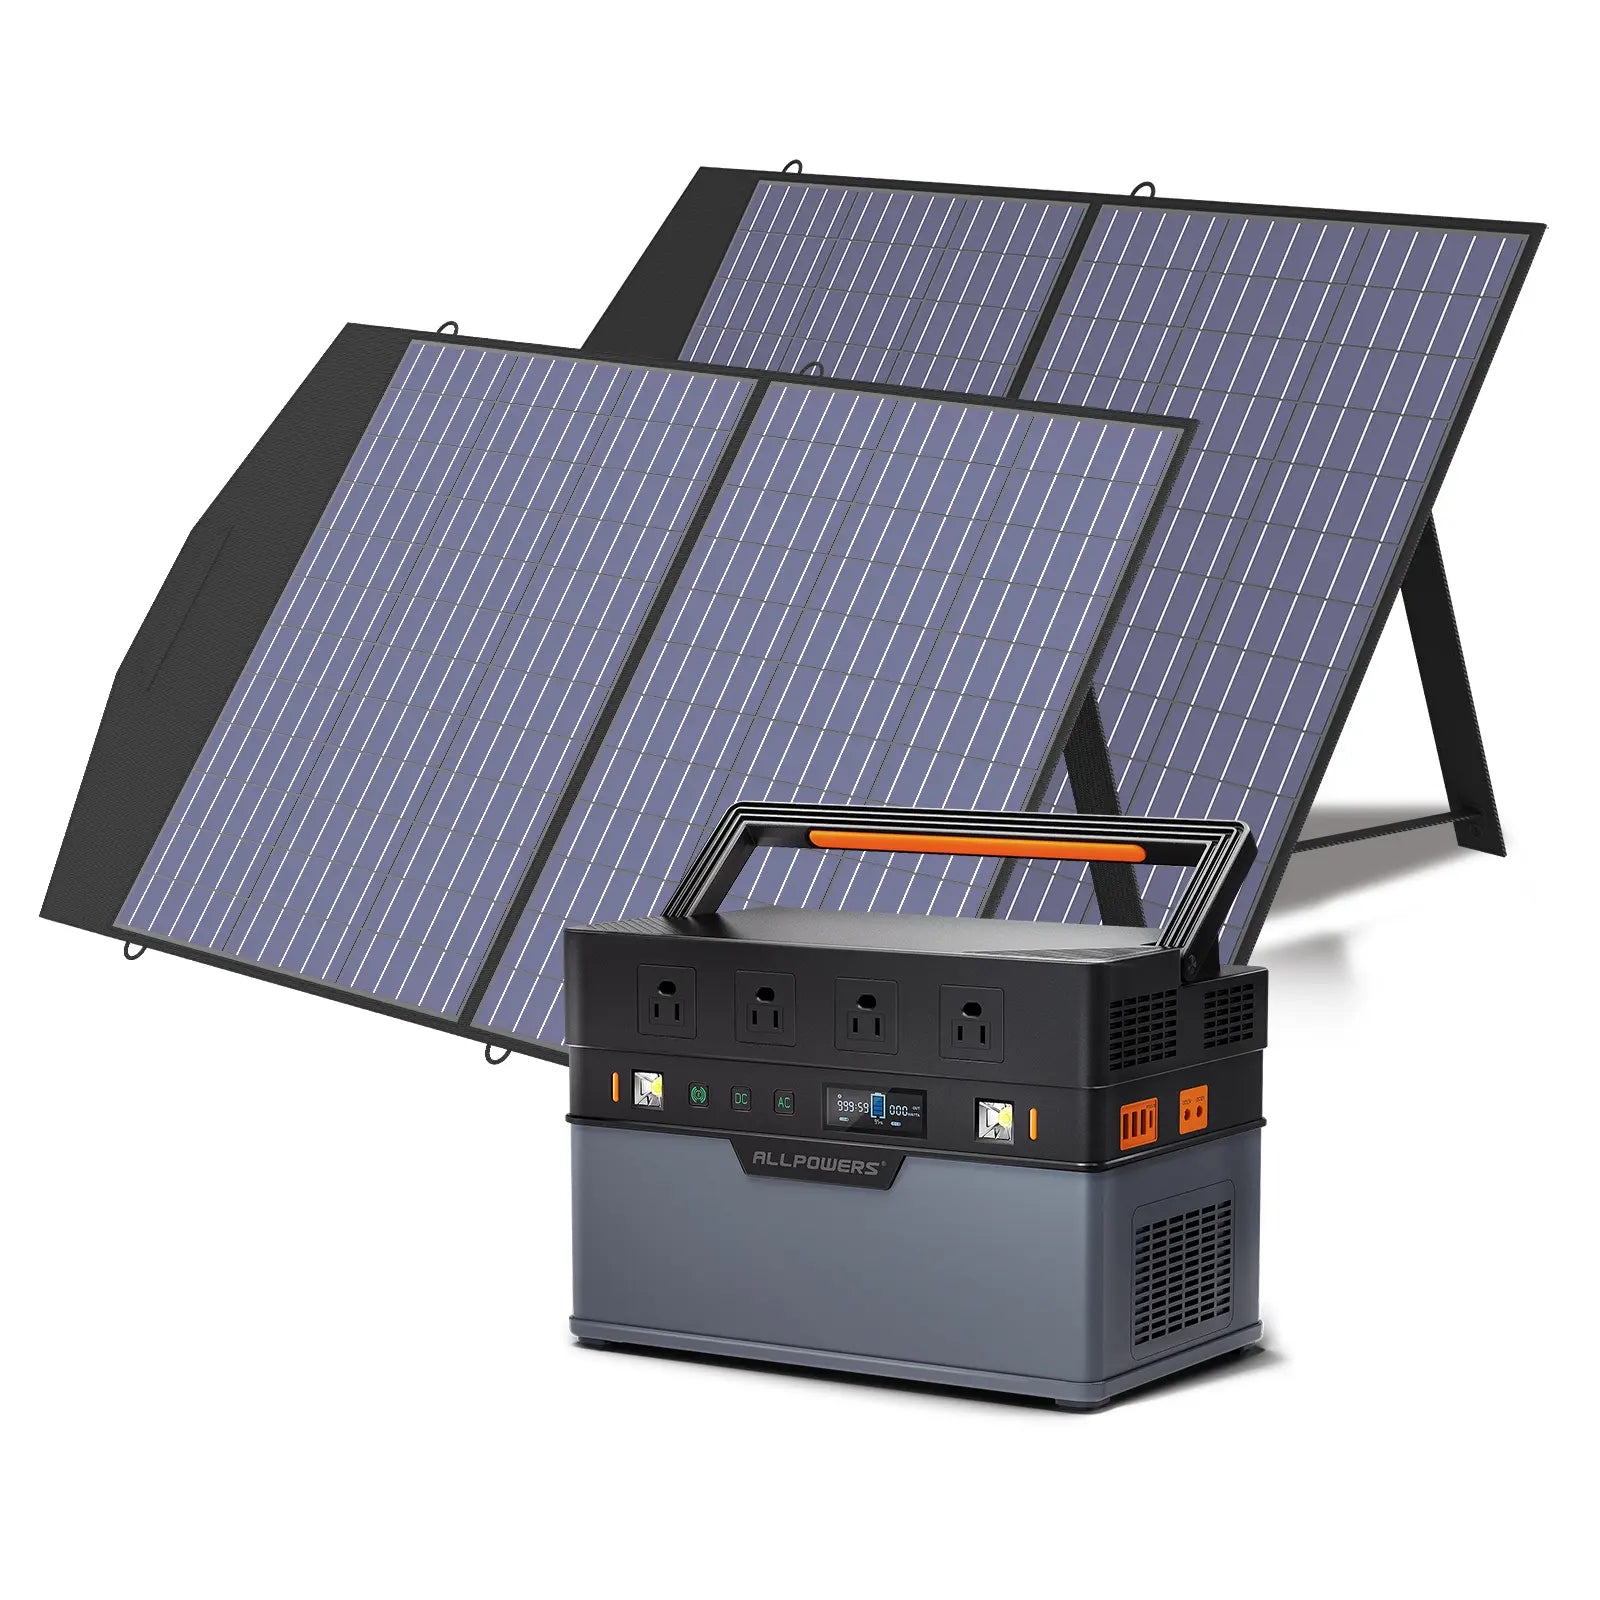 ALLPOWERS S1500 Portable Power Station 1500W 1092Wh (S1500 + 2 x SP027 100W Solar Panel)